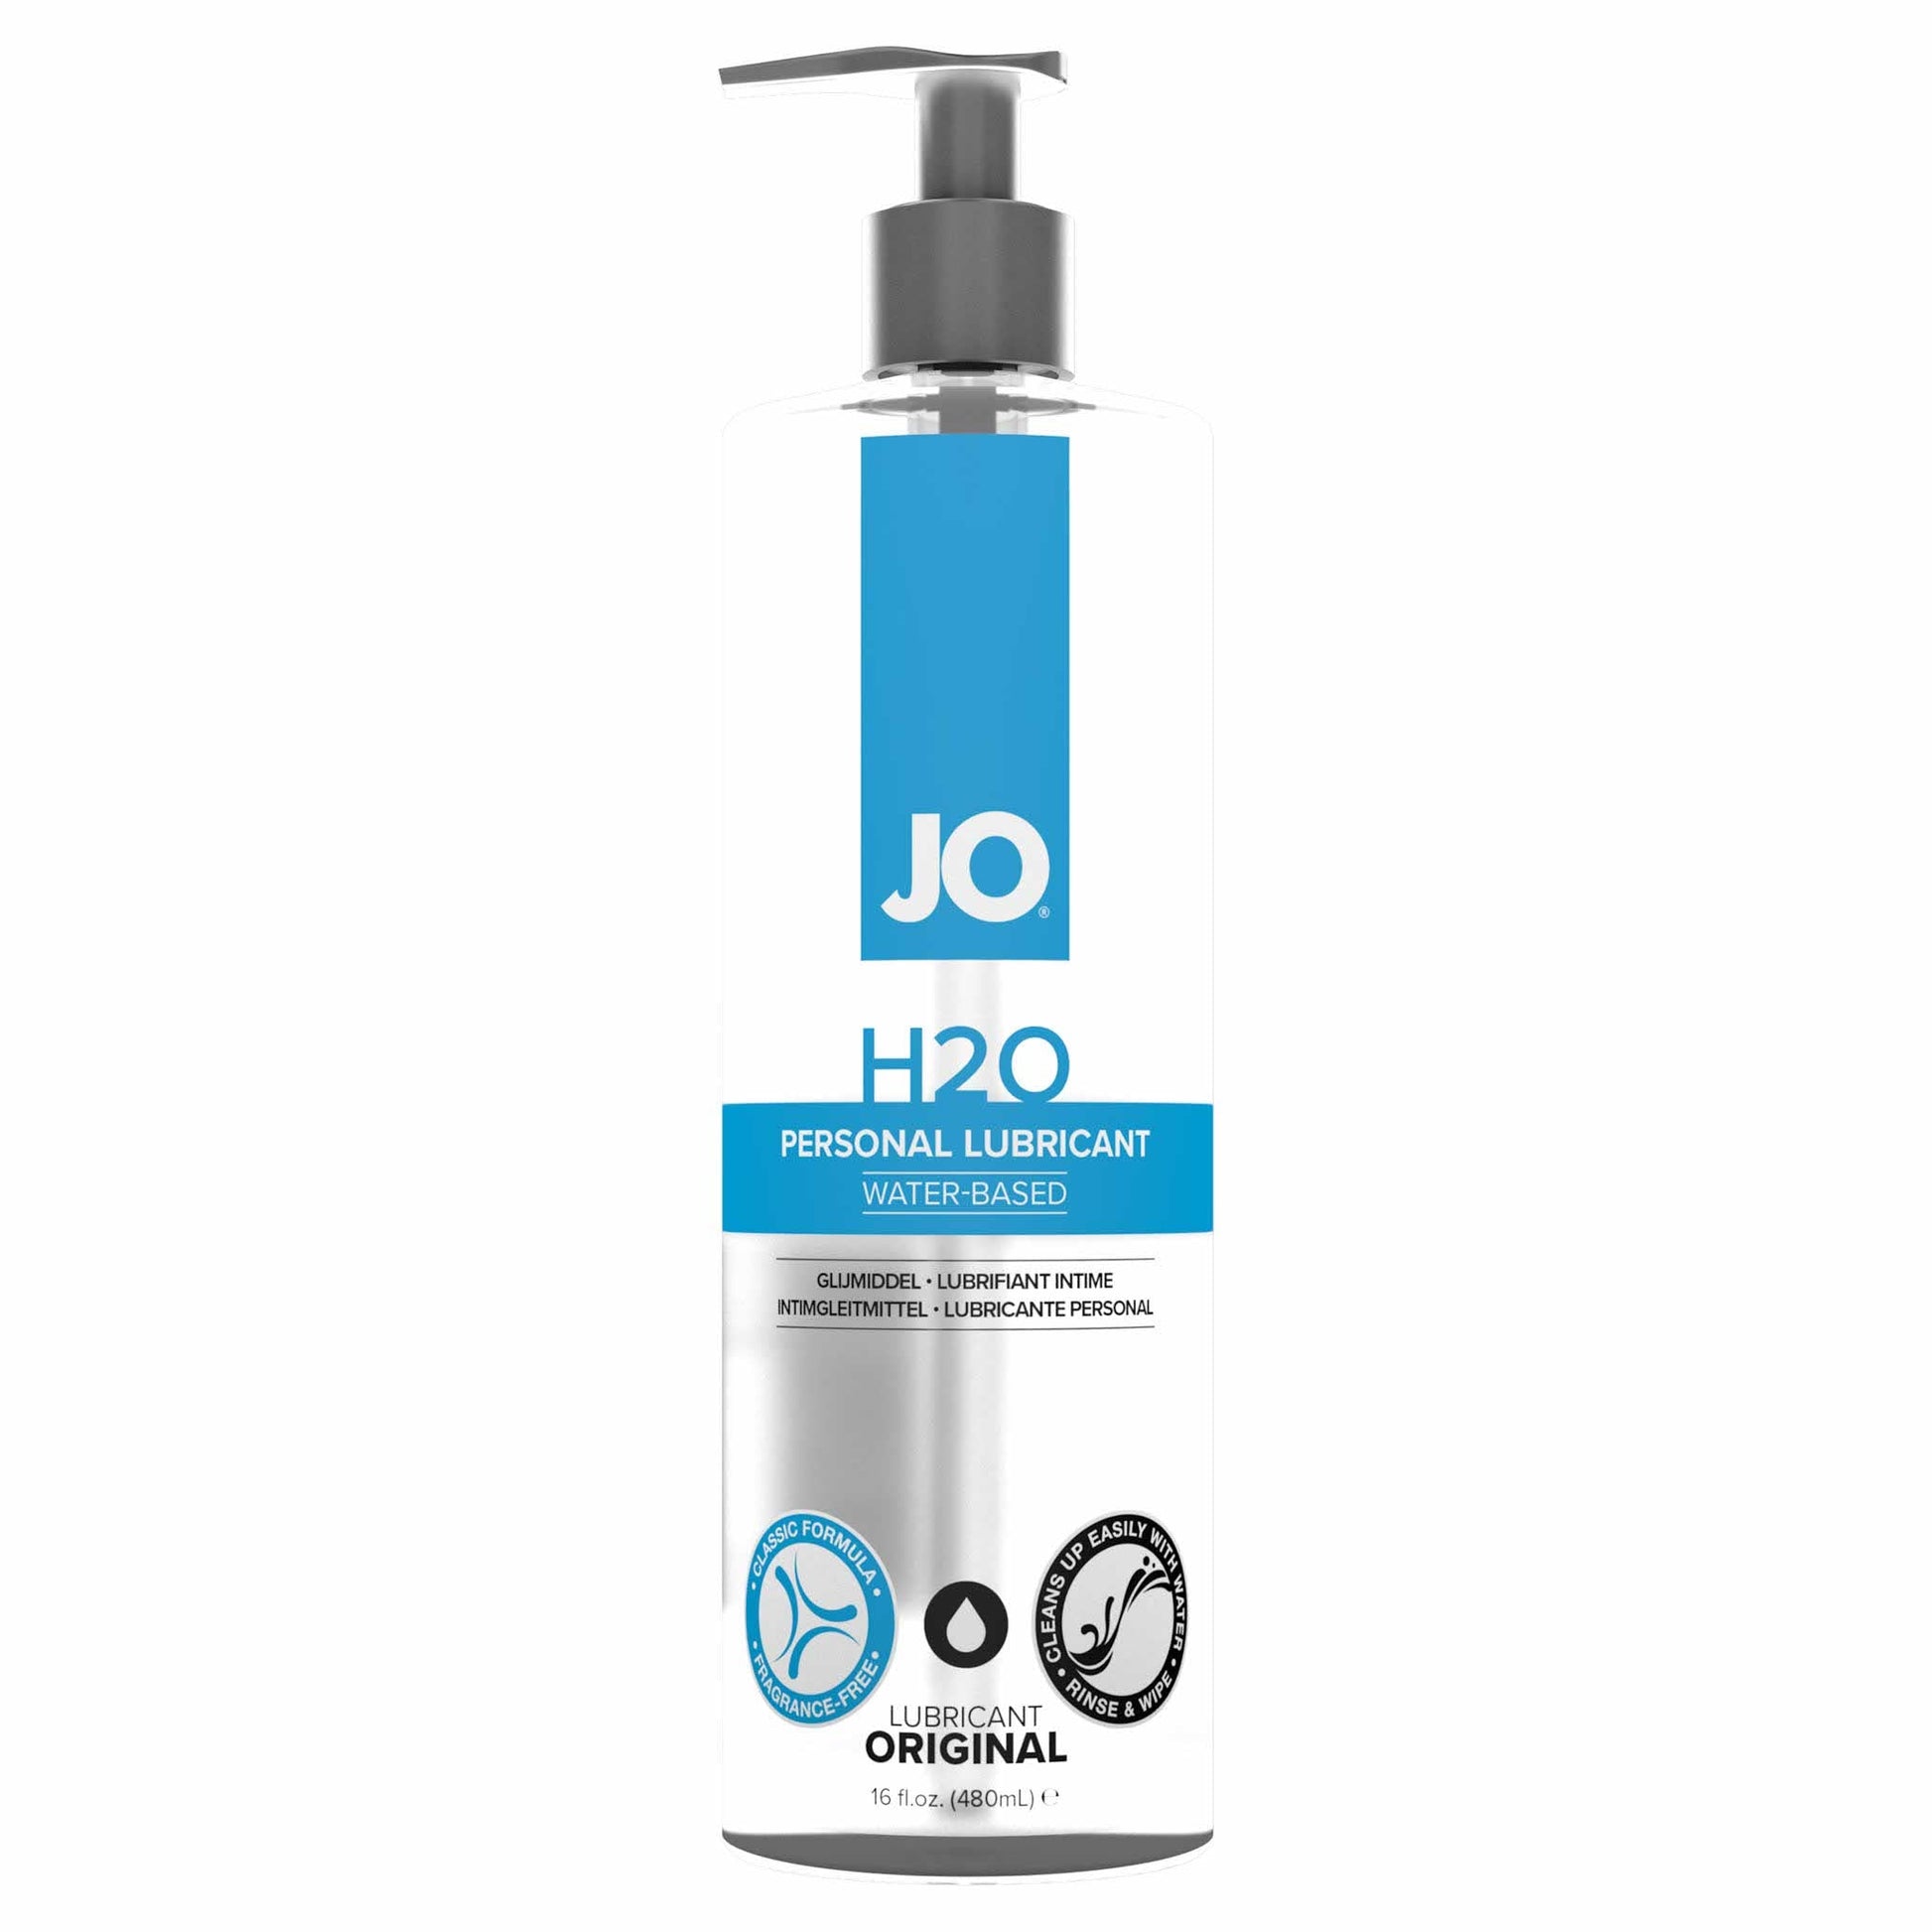 front view of the jo h2o classic personal water-based lubricant original 16oz